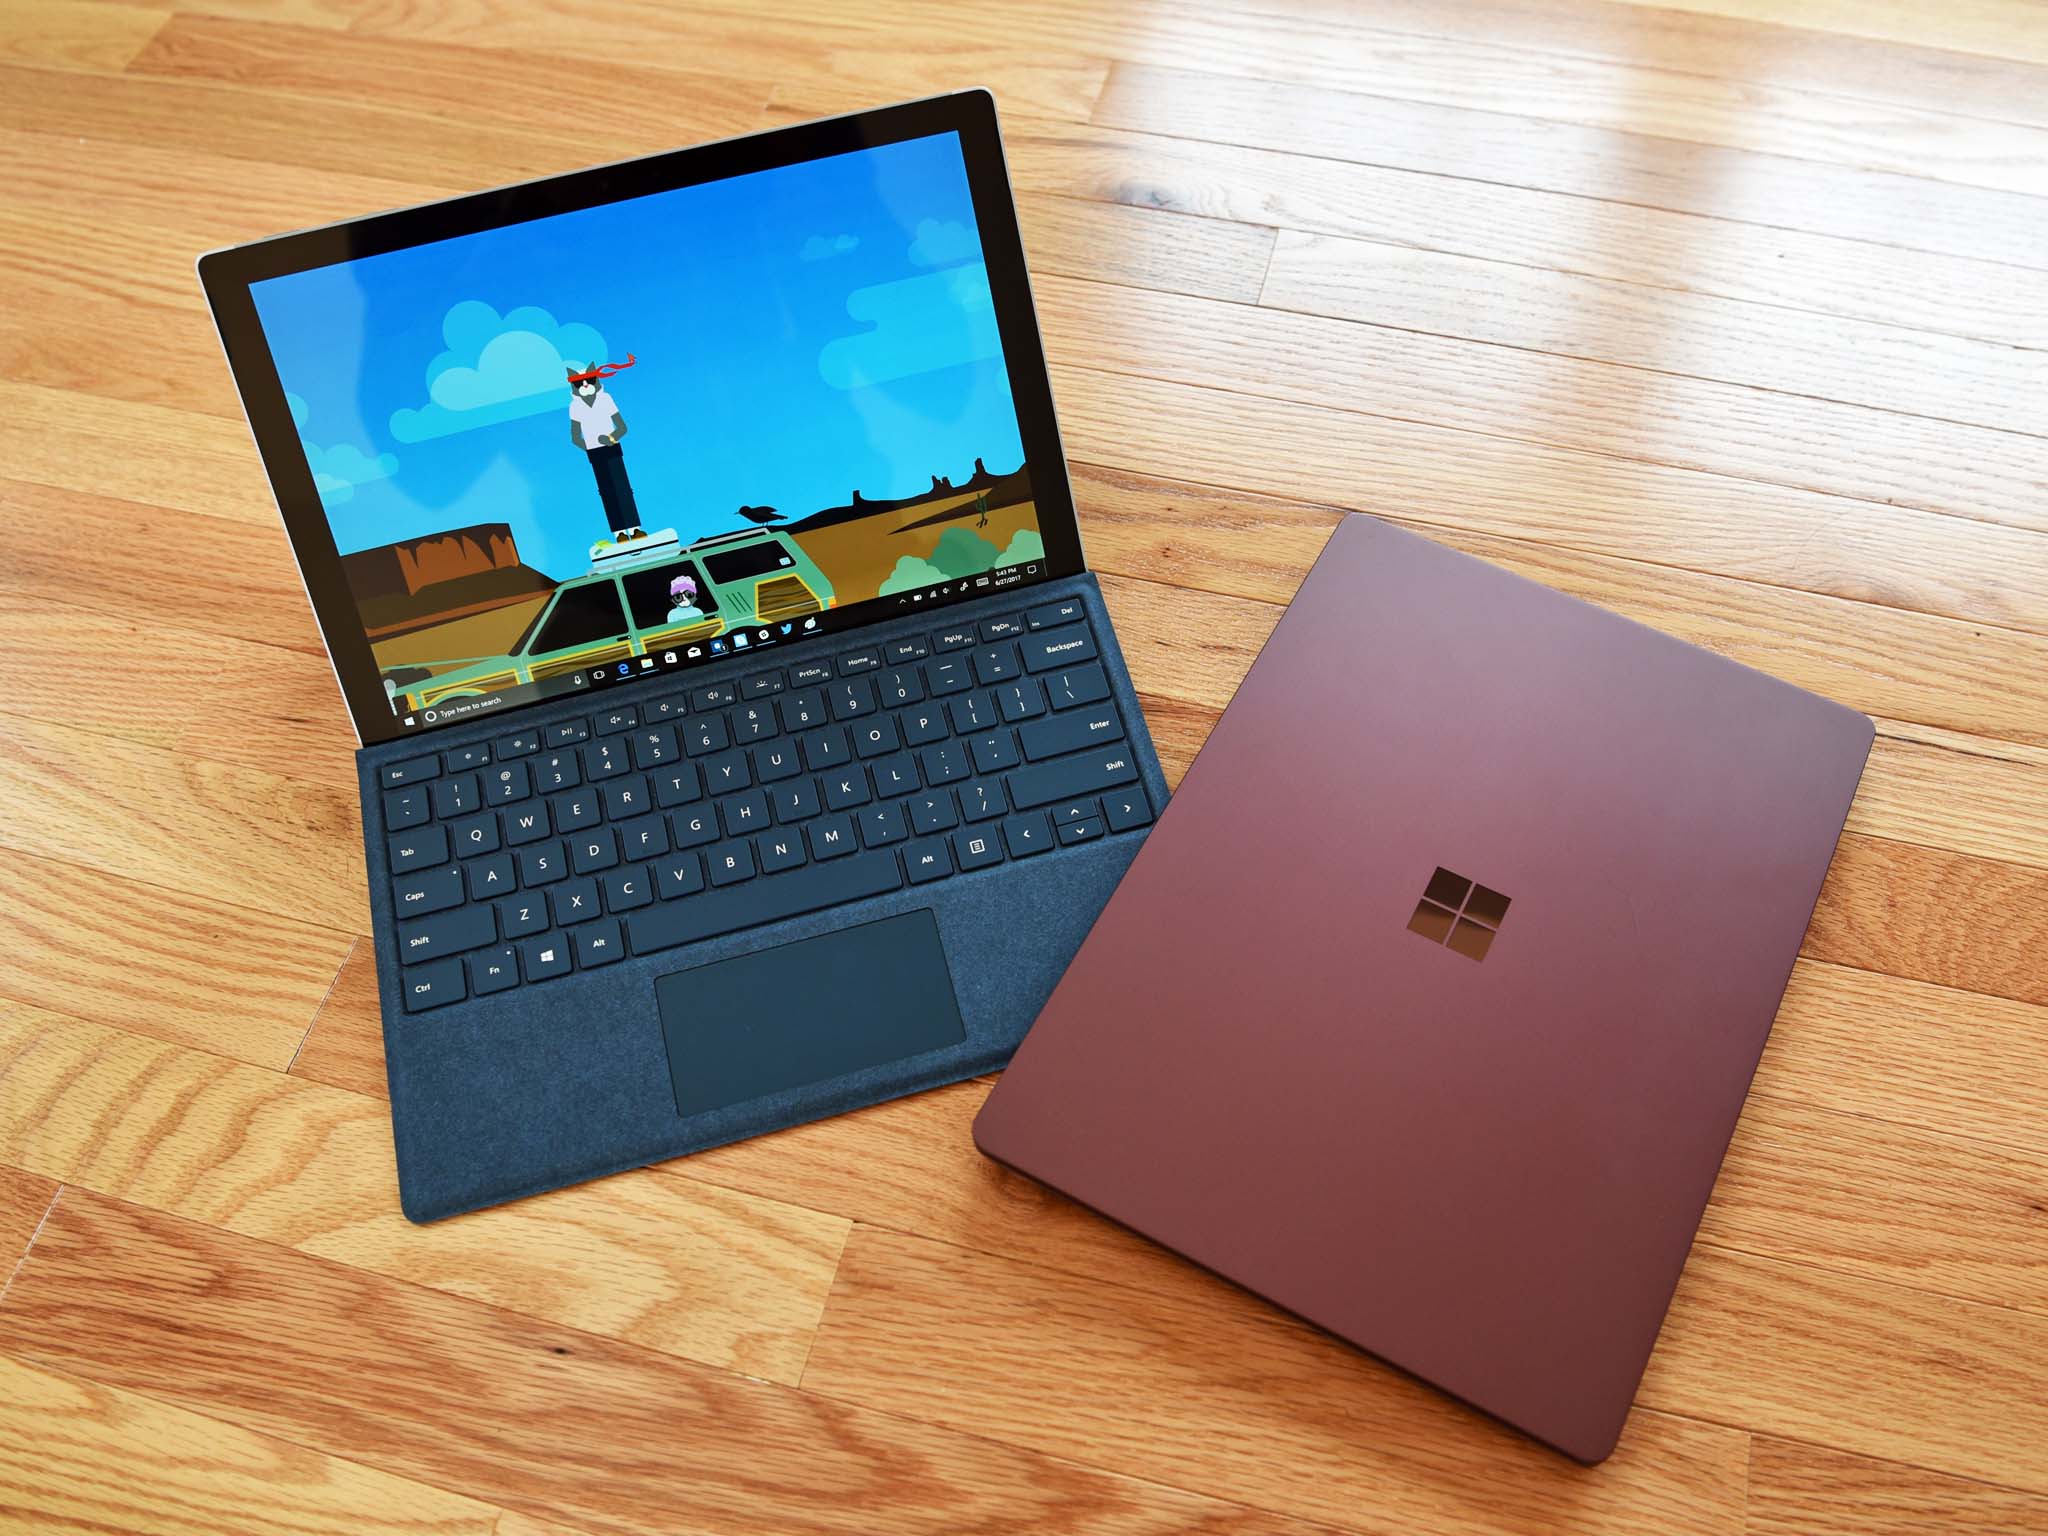 Why Surface Laptop And Surface Pro Are No Good For Gaming